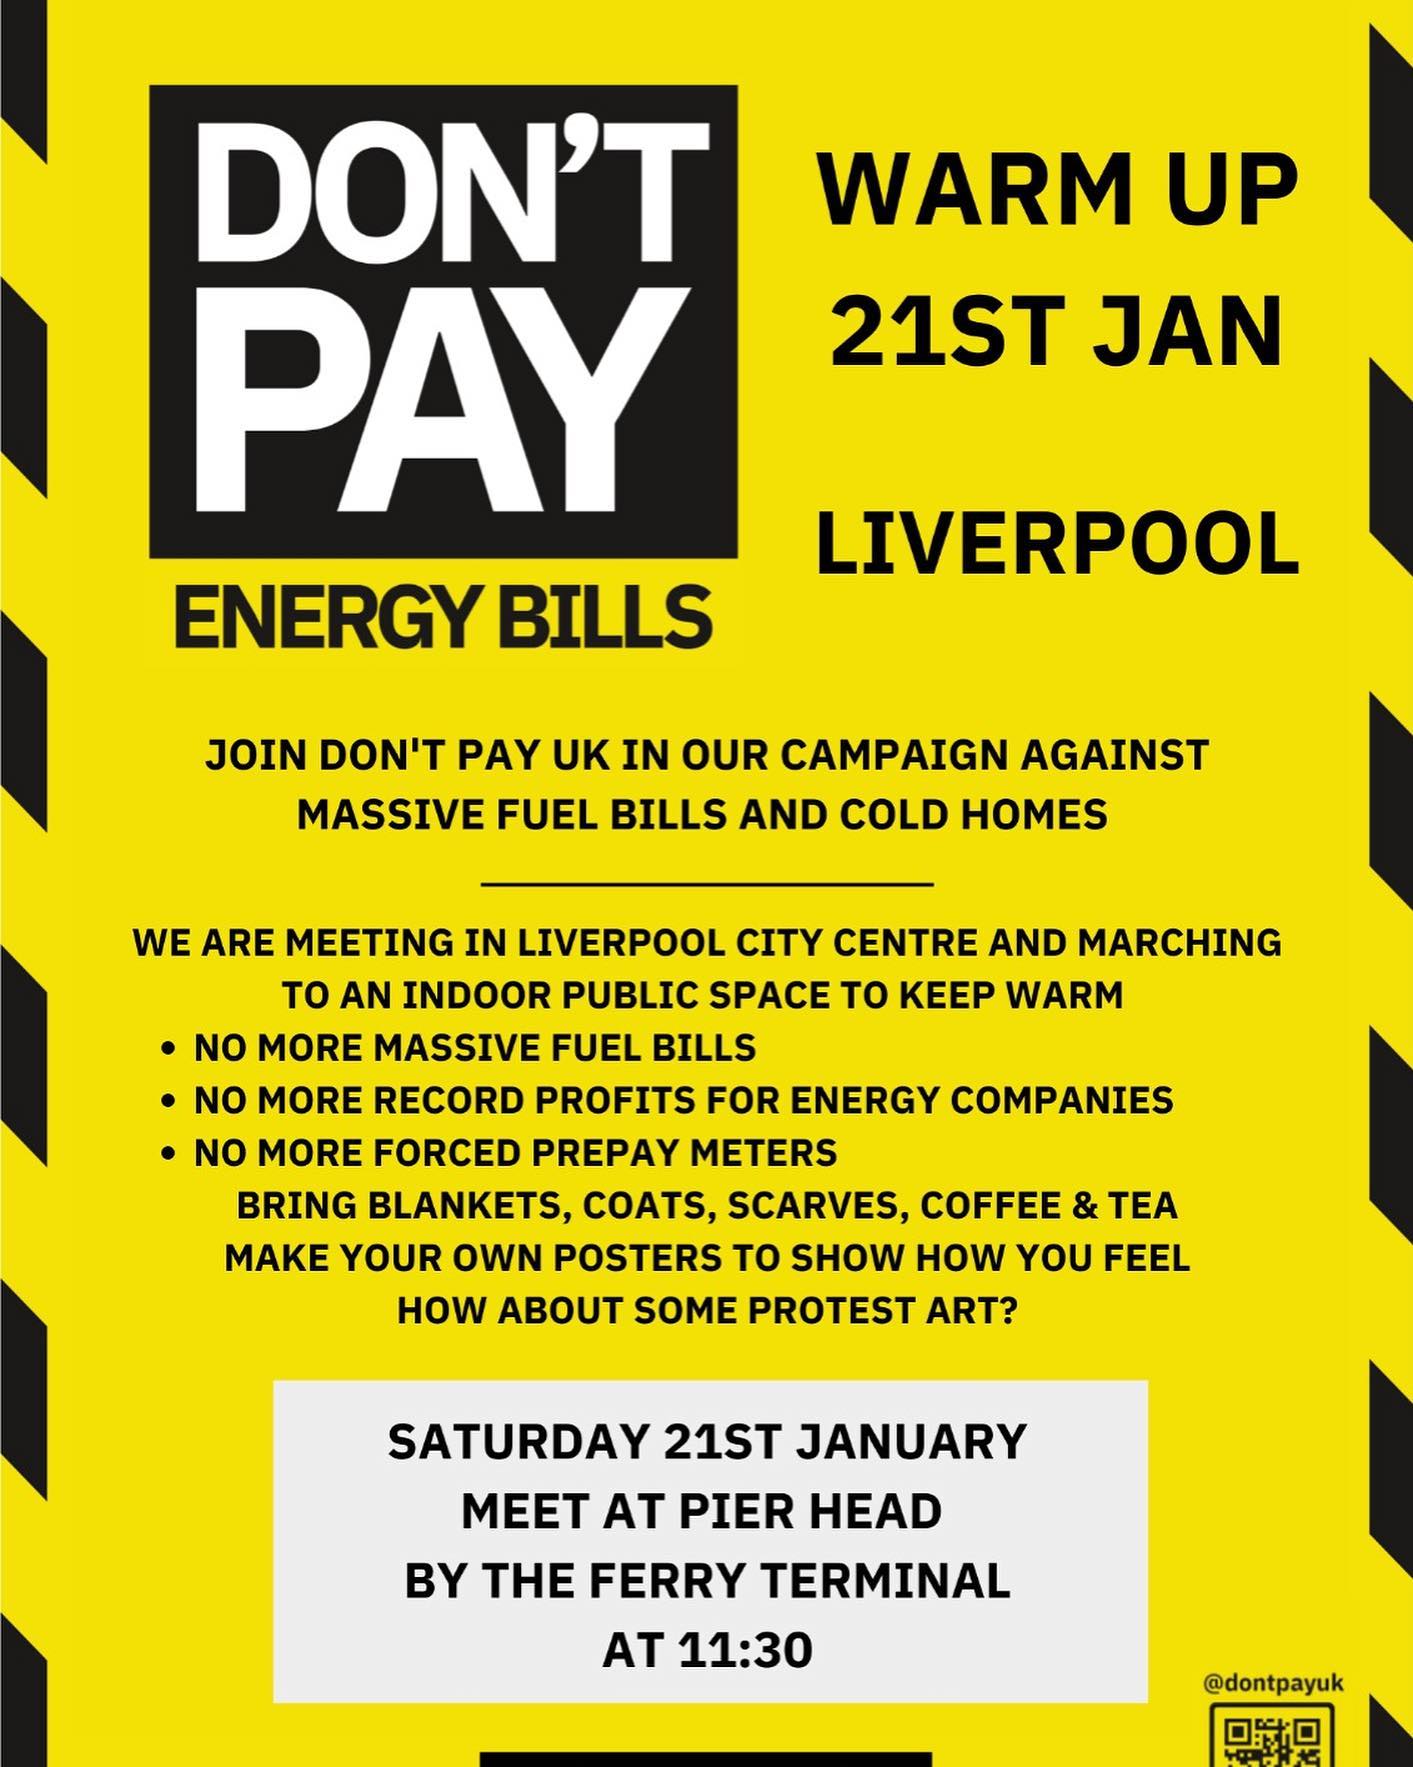 Don’t Pay Energy Bills. Warm Up 21st Jan. Liverpool. Join Don’t Pay U.K. in our campaign against massive fuel bills and cold homes. We are meeting in Liverpool city centre and marching to an indoor public space to keep warm. No more massive fuel bills. No more record profits for energy companies. No more forced prepay meters. Bring blankets, coats, scarves, coffee & tea. Make your own posters to show how you feel. How about some protest art? Saturday 21st January. Meet at Pier Head by the ferry terminal at 11:30. @dontpayuk